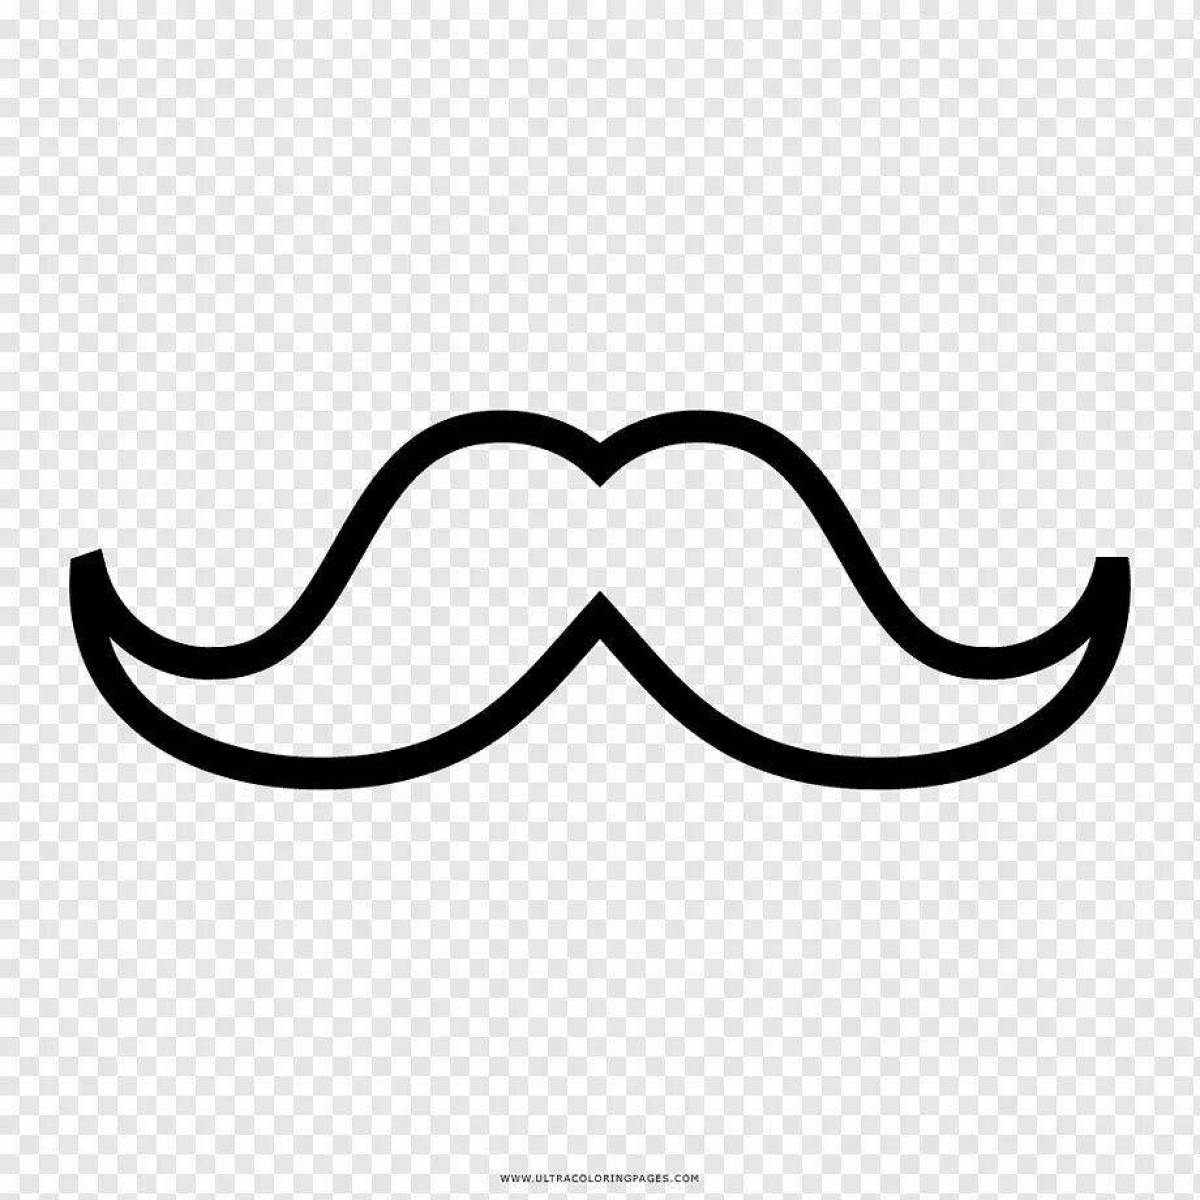 Colored mustache coloring page